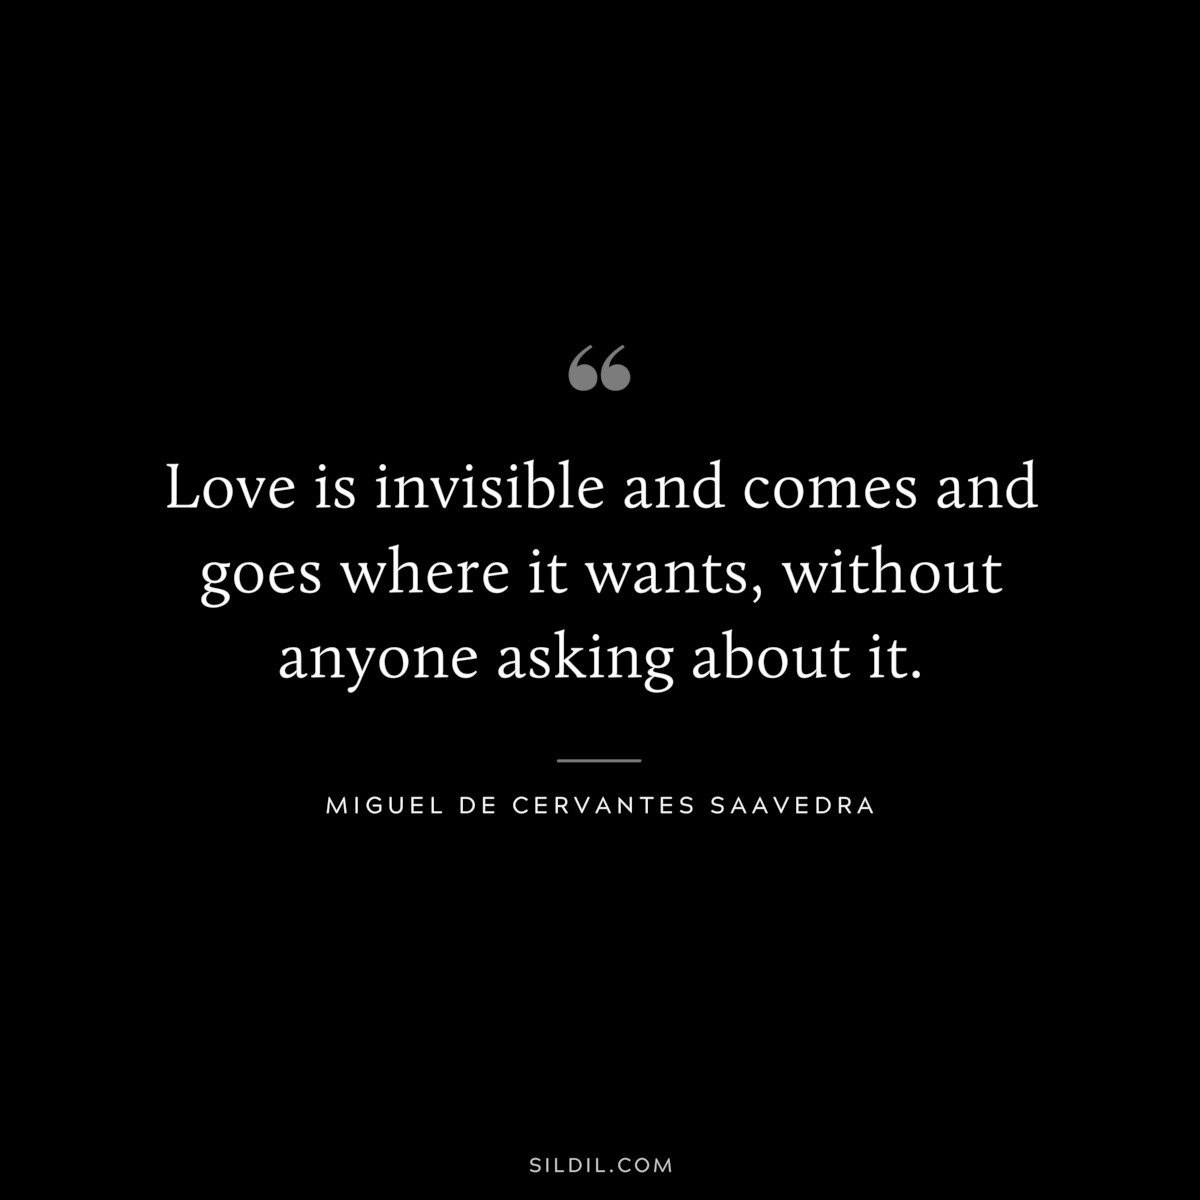 Love is invisible and comes and goes where it wants, without anyone asking about it. ― Miguel de Cervantes Saavedra